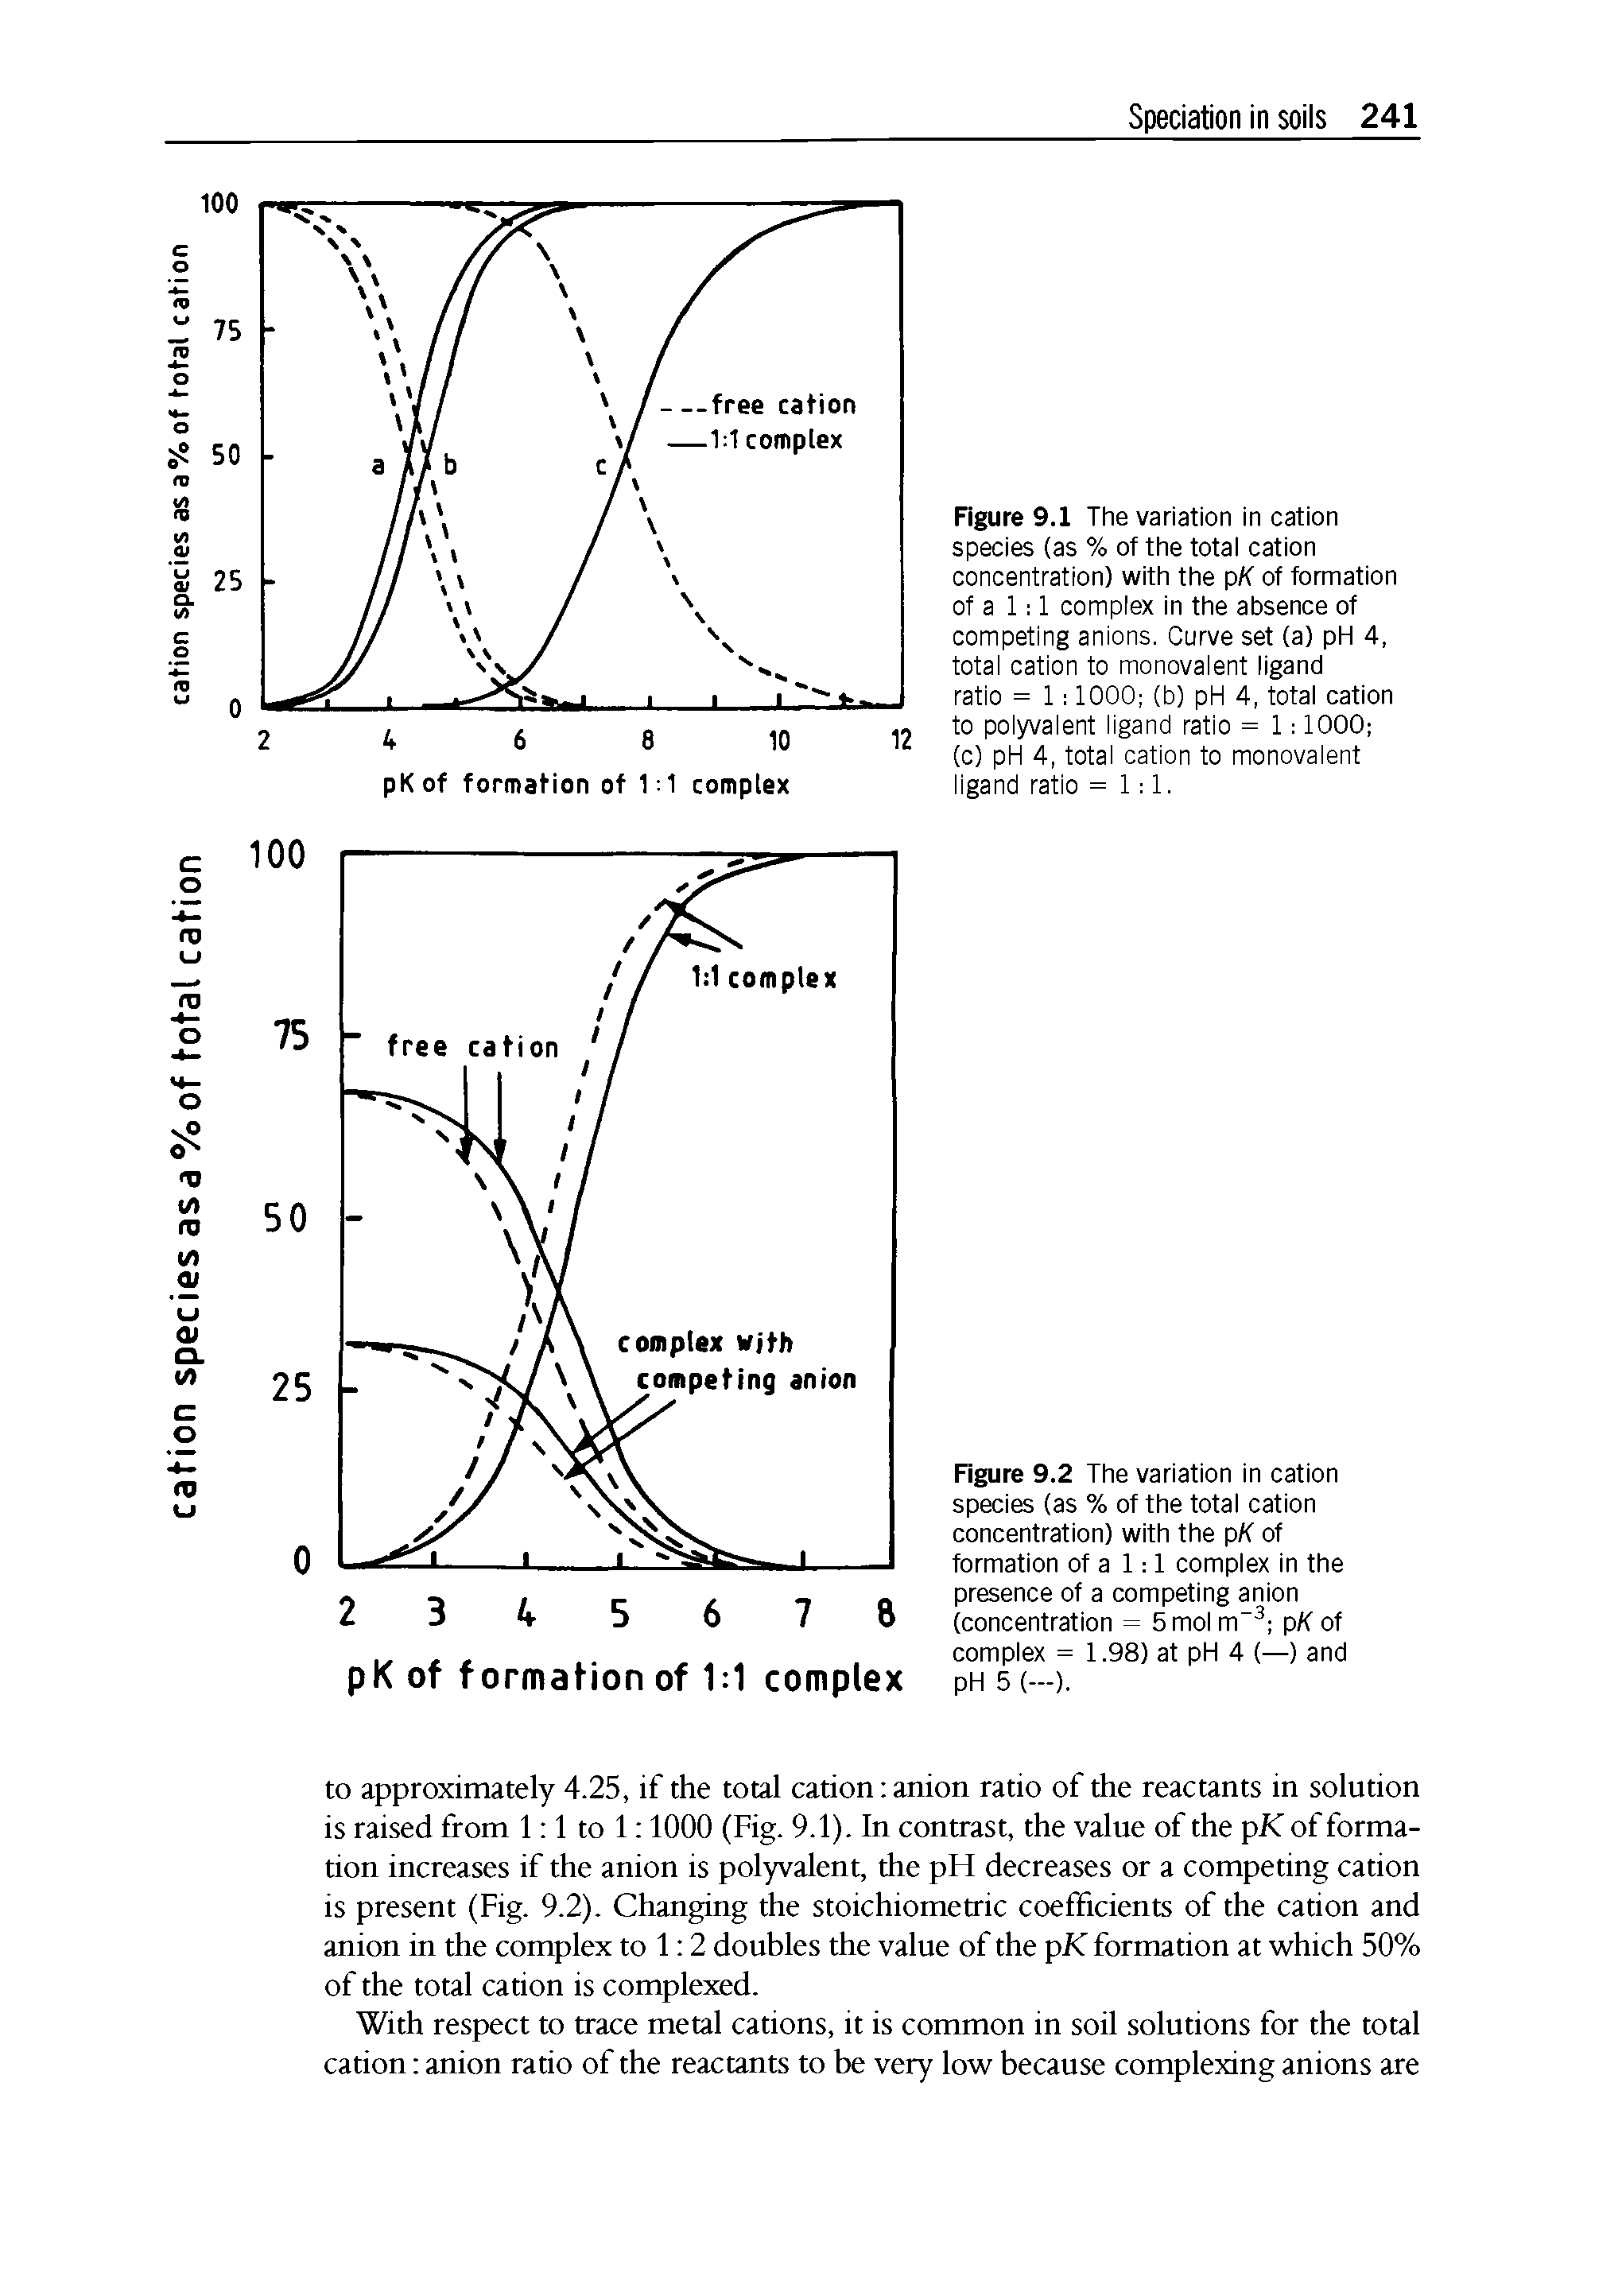 Figure 9.1 The variation in cation species (as % of the total cation concentration) with the pK of formation of a 1 1 complex in the absence of competing anions. Curve set (a) pH 4, total cation to monovalent ligand ratio = 1 1000 (b) pH 4, total cation to polyvalent ligand ratio = 1 1000 (c) pH 4, total cation to monovalent ligand ratio =1 1.